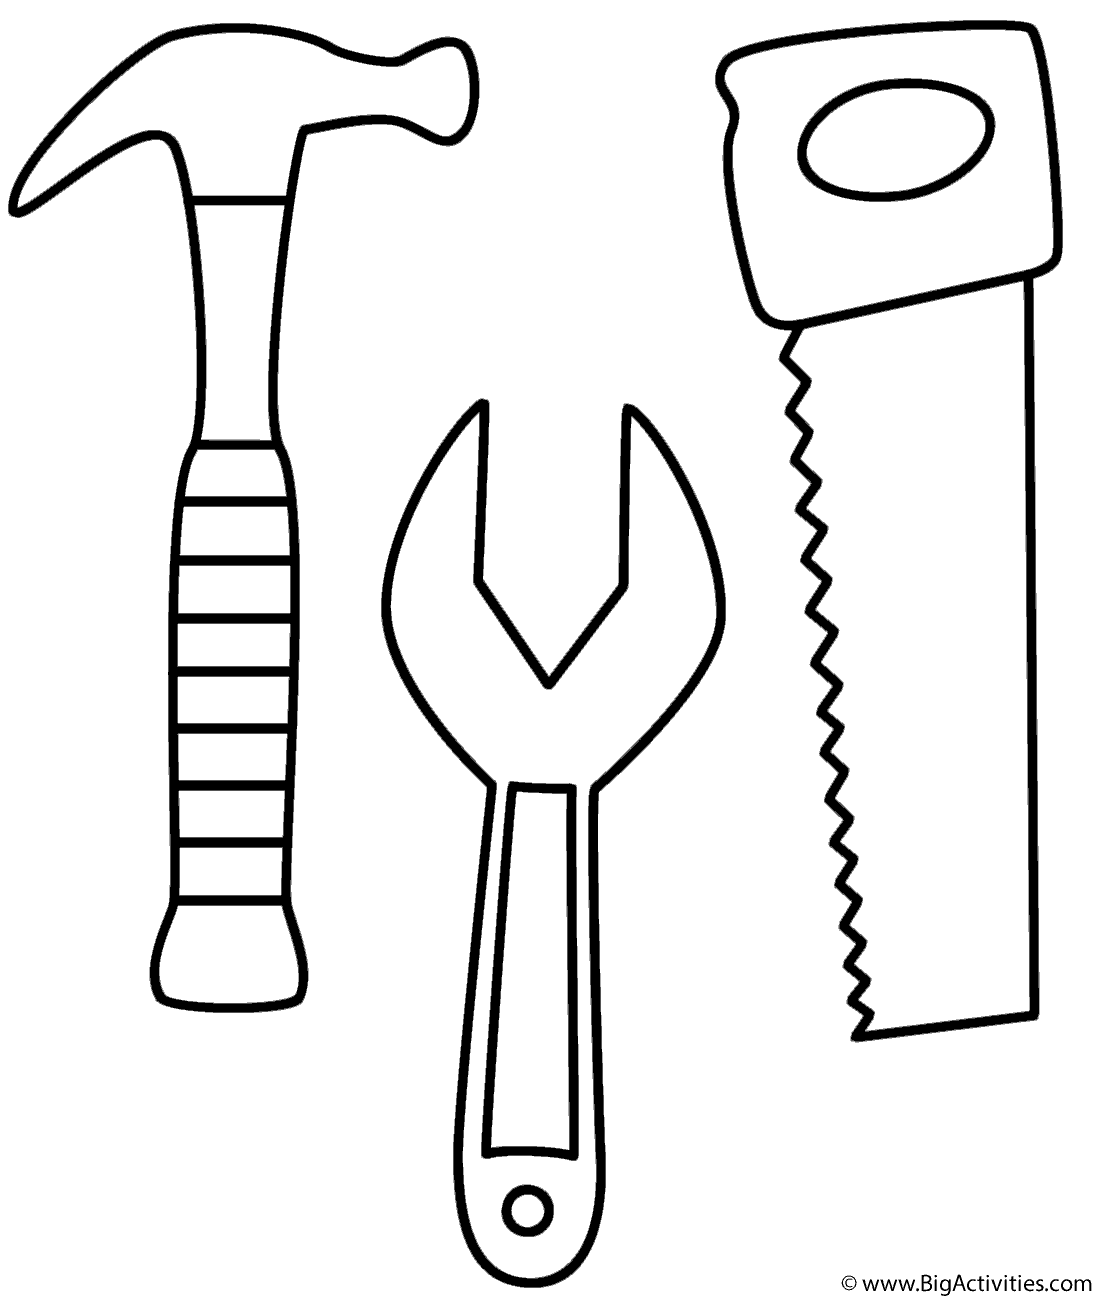 Coloring Pages Of Tools